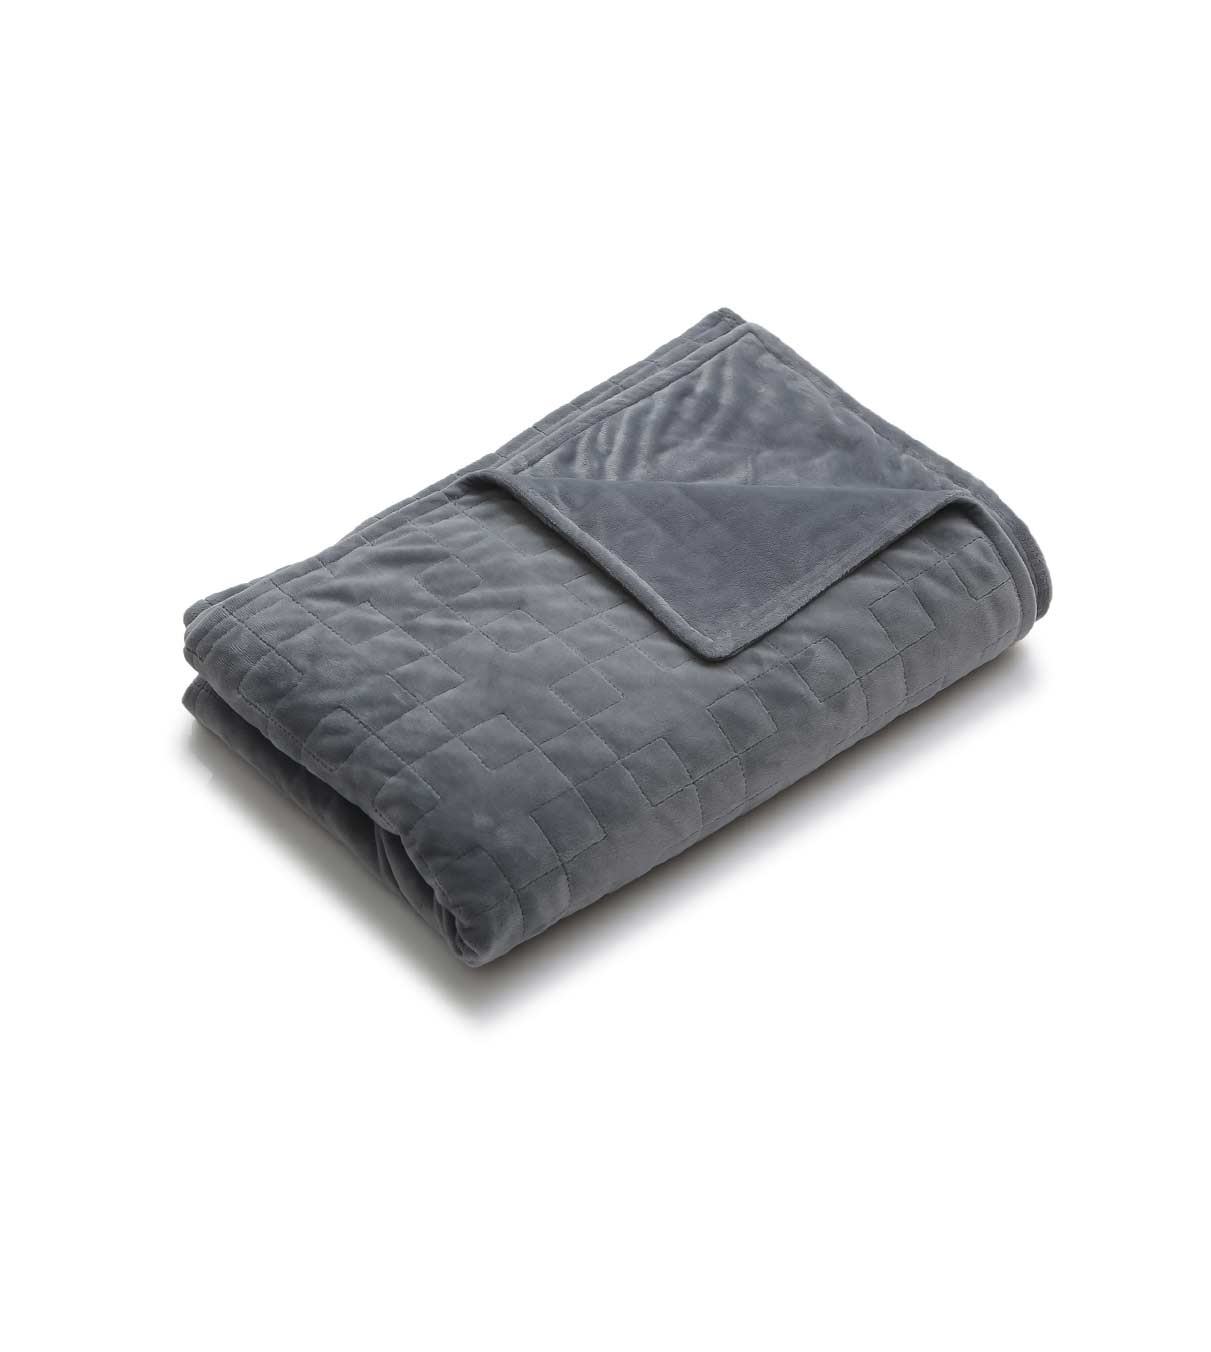 Product: Soft Weighted Blanket Duvet Cover | Color: Plaid